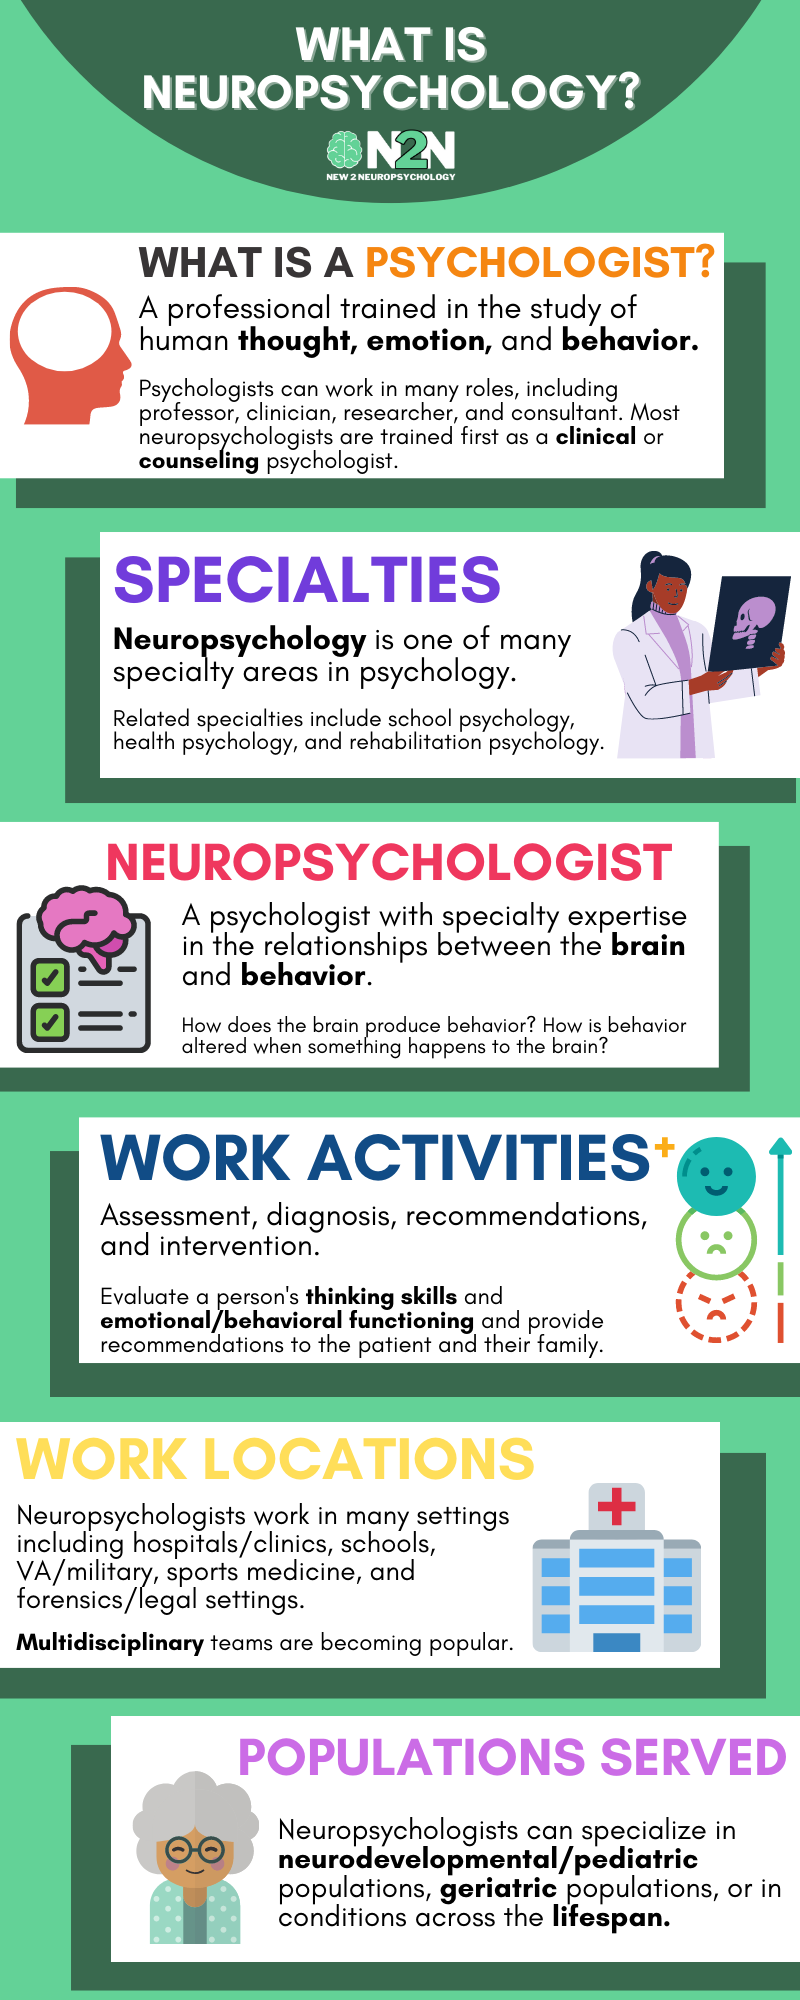 What is a psychologist? A professional trained in the study of human thought, emotion, and behavior. Psychologists can work in many roles, including professor, clinician, researcher, and consultant. Most neuropsychologists are trained first as a clinical or counseling psychologist. Specialties. Neuropsychology is one of many specialty areas in psychology. Related specialties include school psychology, health psychology, and rehabilitation psychology. Neuropsychologist. A psychologist with specialty expertise in the relationships between the brain and behavior. How does the brain produce behavior? How is behavior altered when something happens to the brain? Work activities. Assessment, diagnosis, recommendations, and intervention. Evaluate a person's thinking skills and emotional/behavioral functioning and provide recommendations to the patient and their family. Work locations. Neuropsychologists work in many settings, including VA/military, sports medicine, and forensics/legal settings. Multidisciplinary teams are becoming increasingly popular. Populations served. Neuropsychologists can specialize in neurodevelopmental/pediatric populations, geriatric populations, or in conditions across the lifespan.